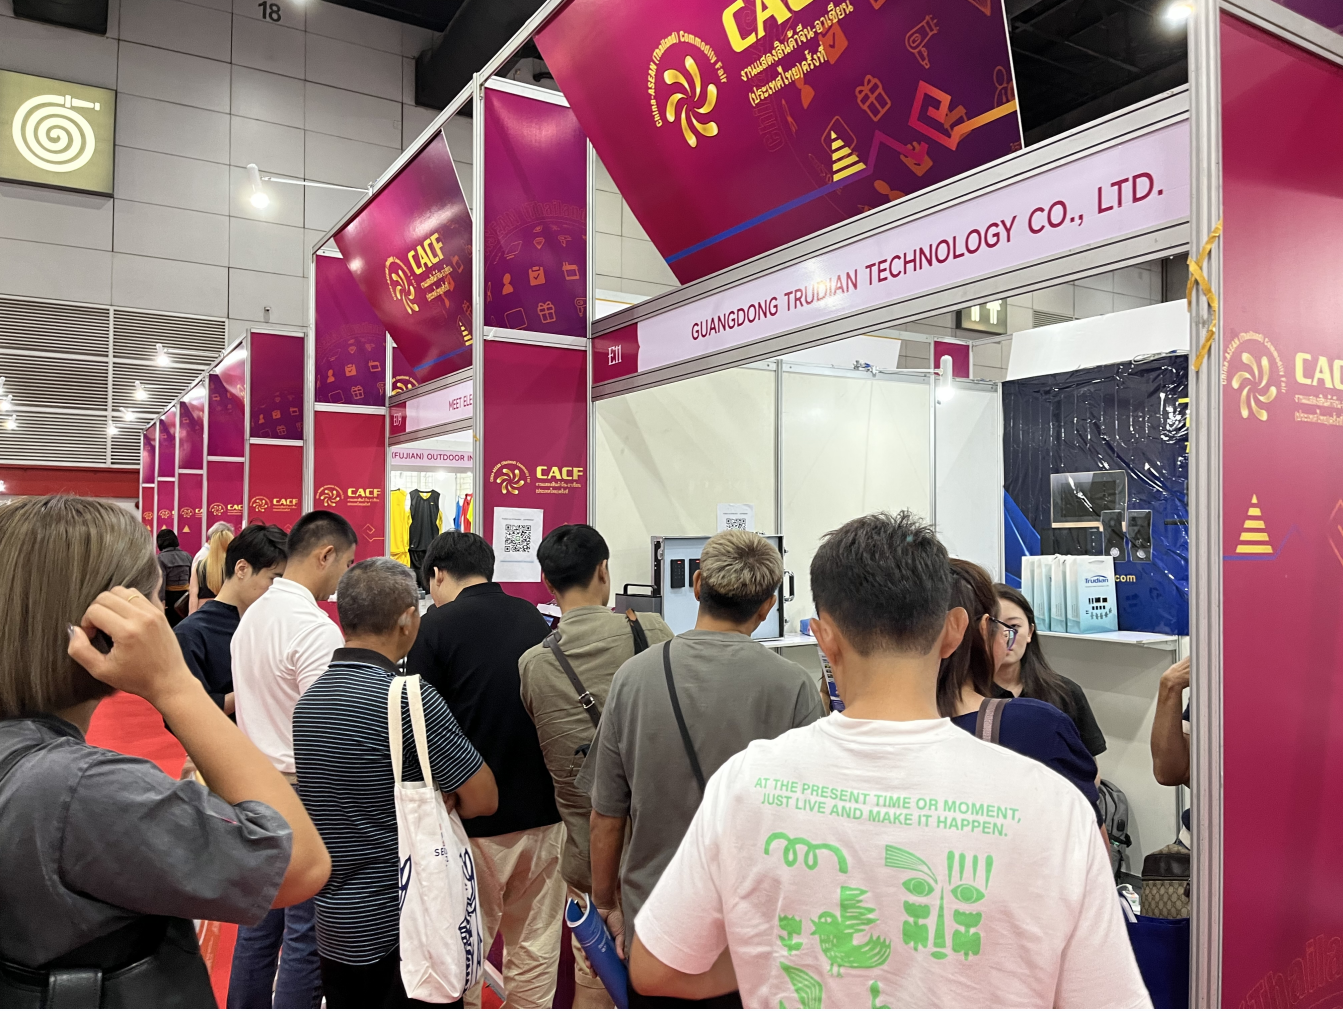 Made in China, Made for ASEAN: The Presence of Trudian at CACF2023